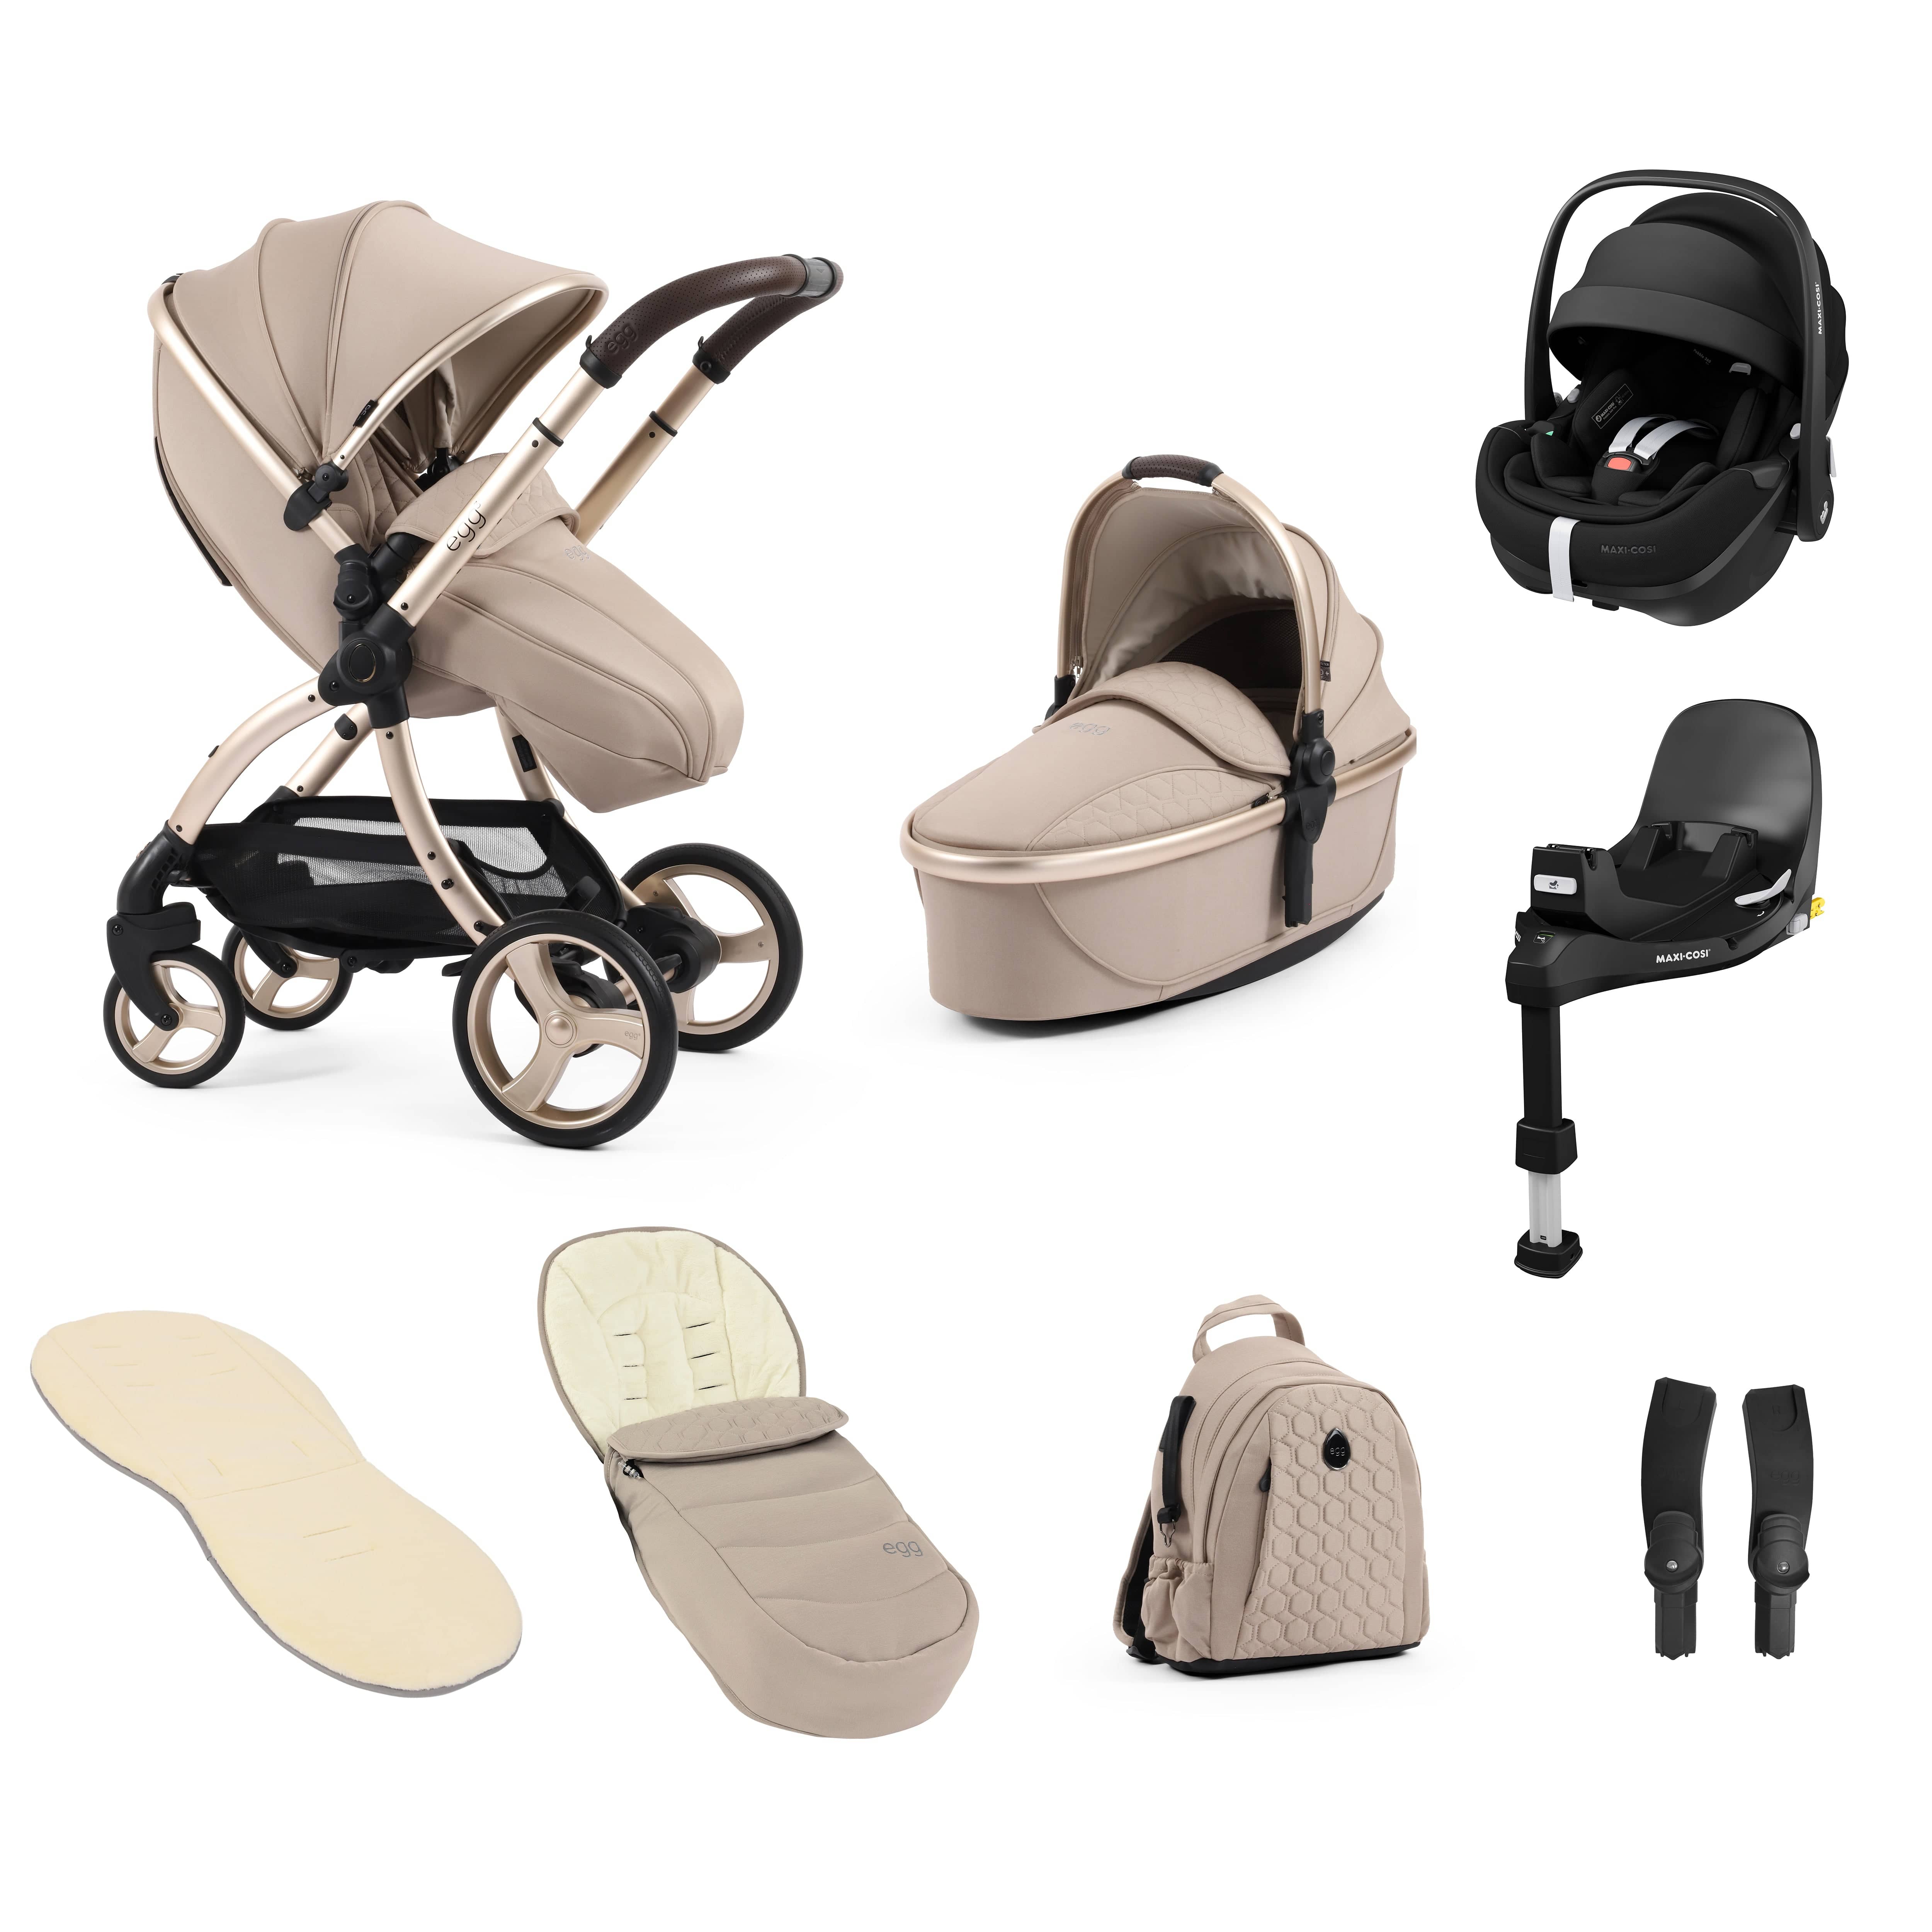 egg3 Luxury Travel System Bundle Feather Baby Prams 14860-FTH 5060711567907